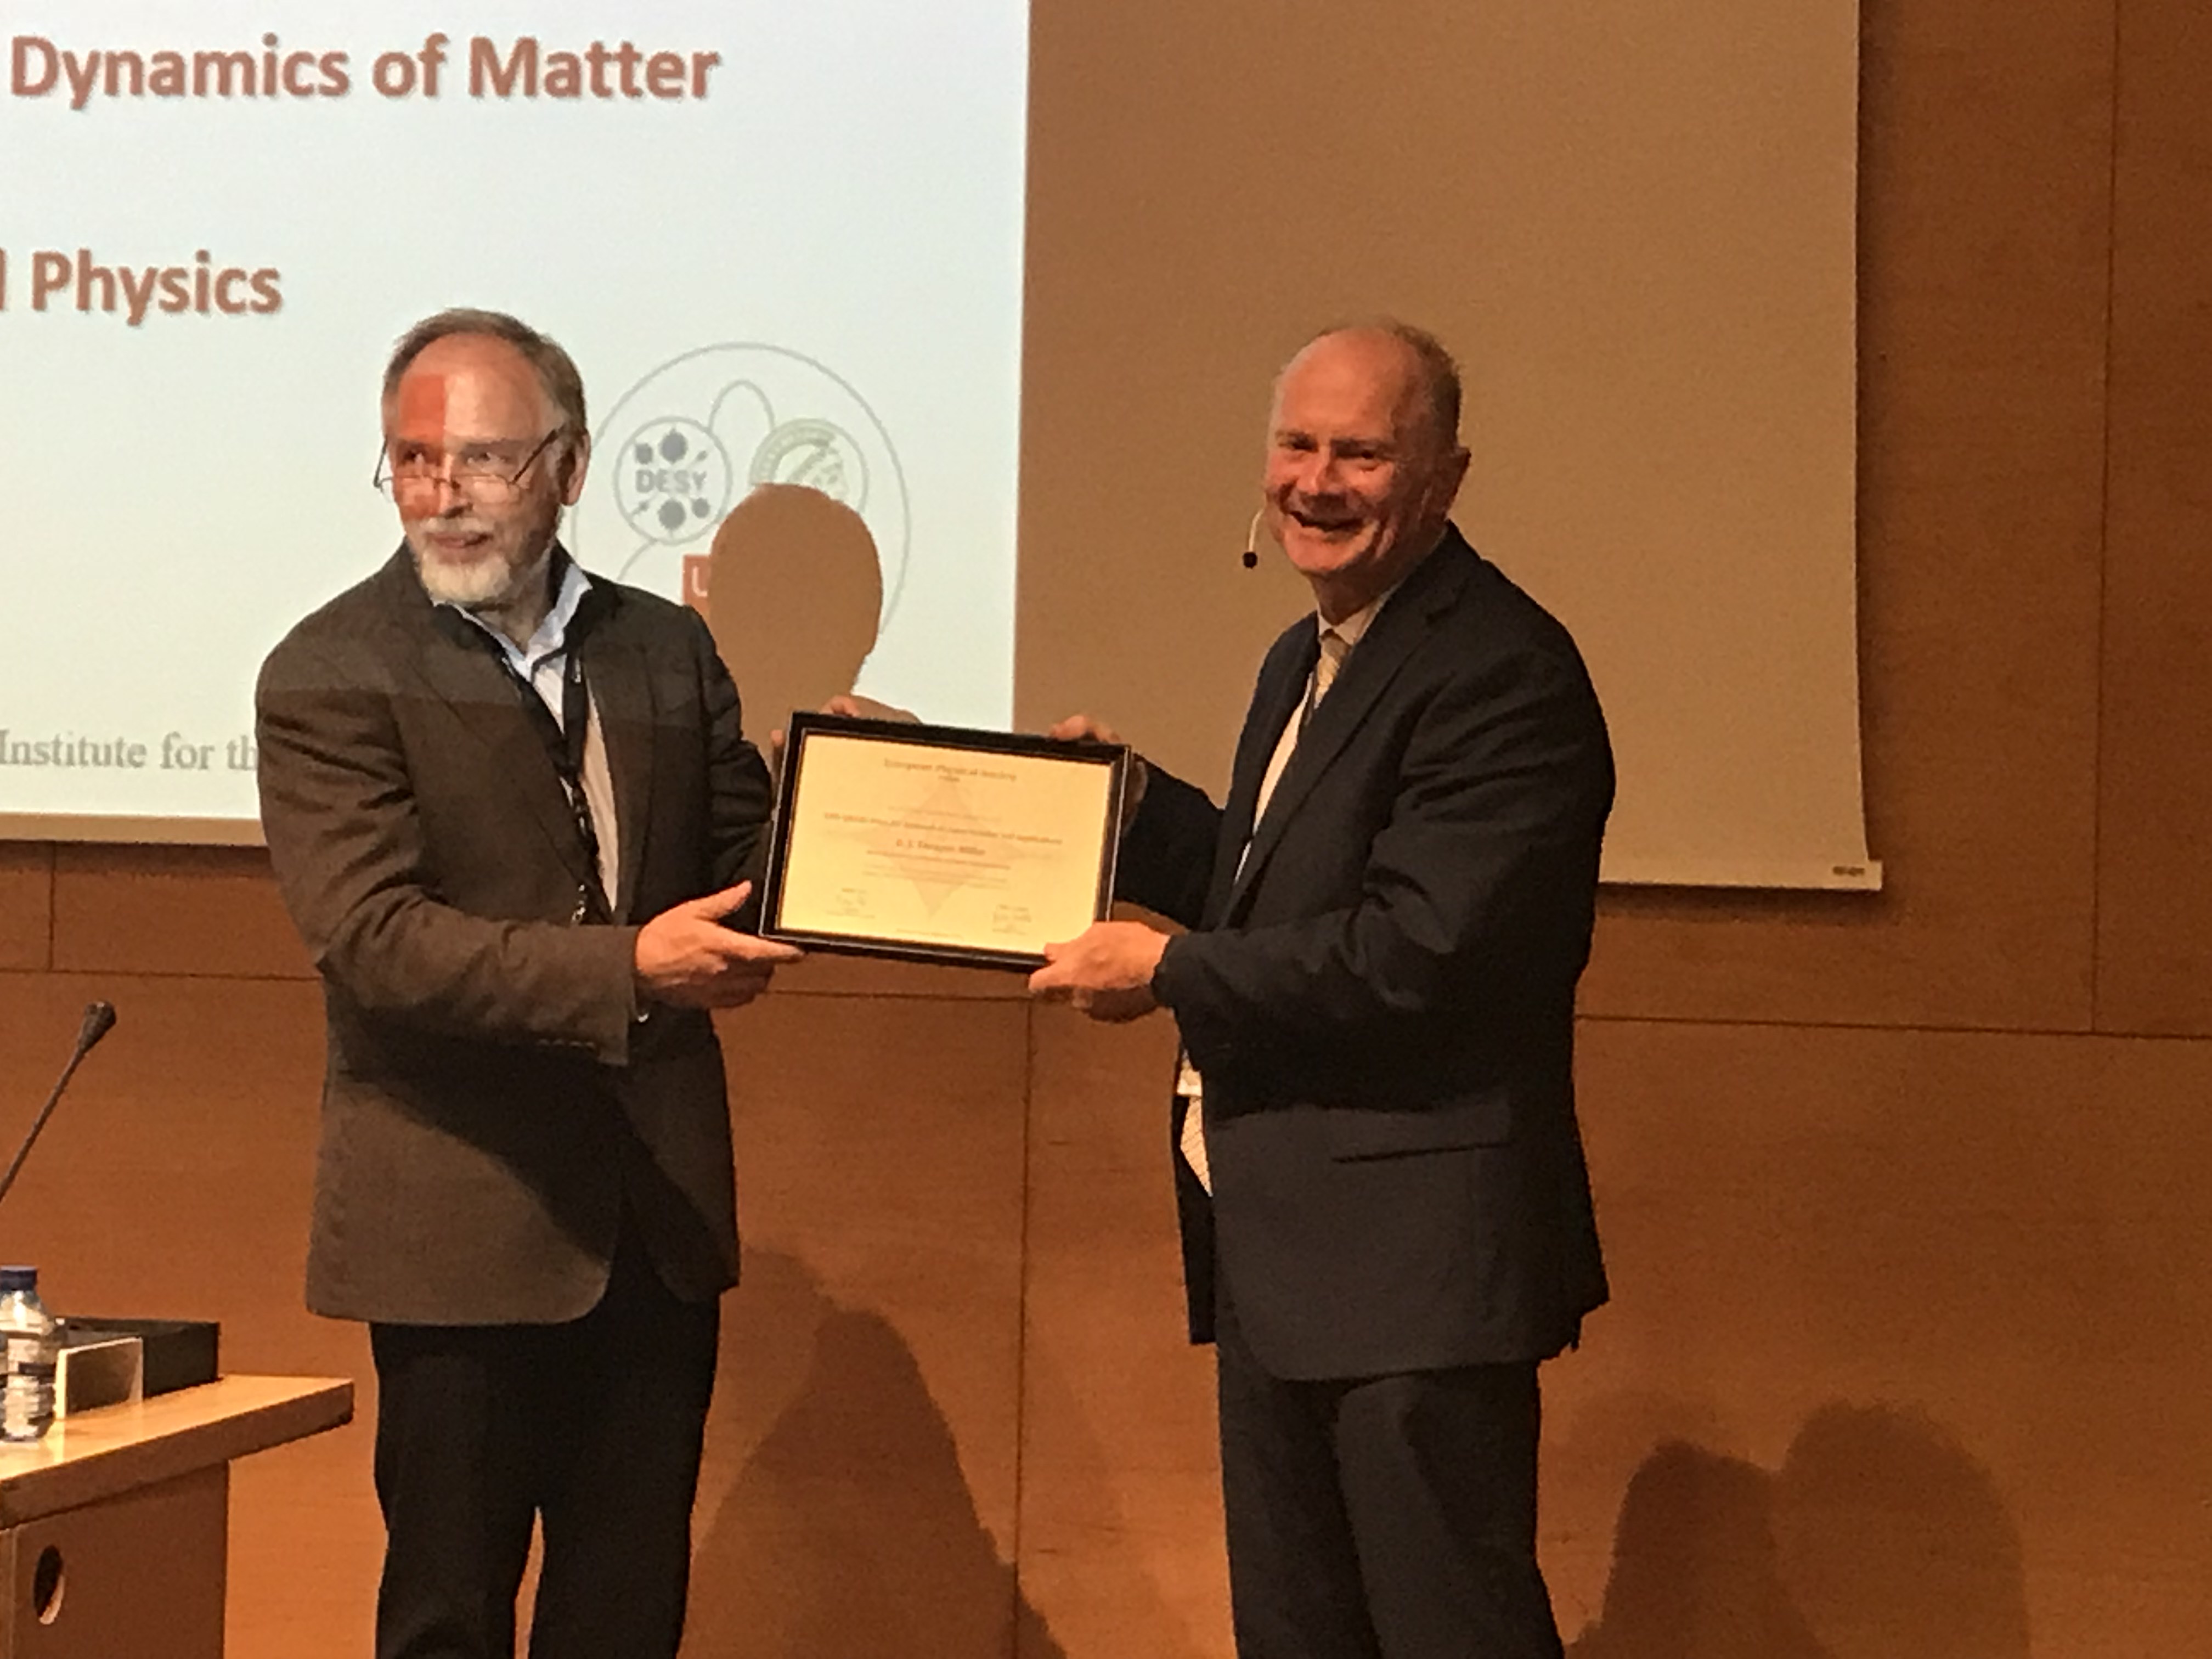 R. J. Dwayne Miller receiving the 2018 prize for research in laser science and applications from Valdas Pasiskevicius